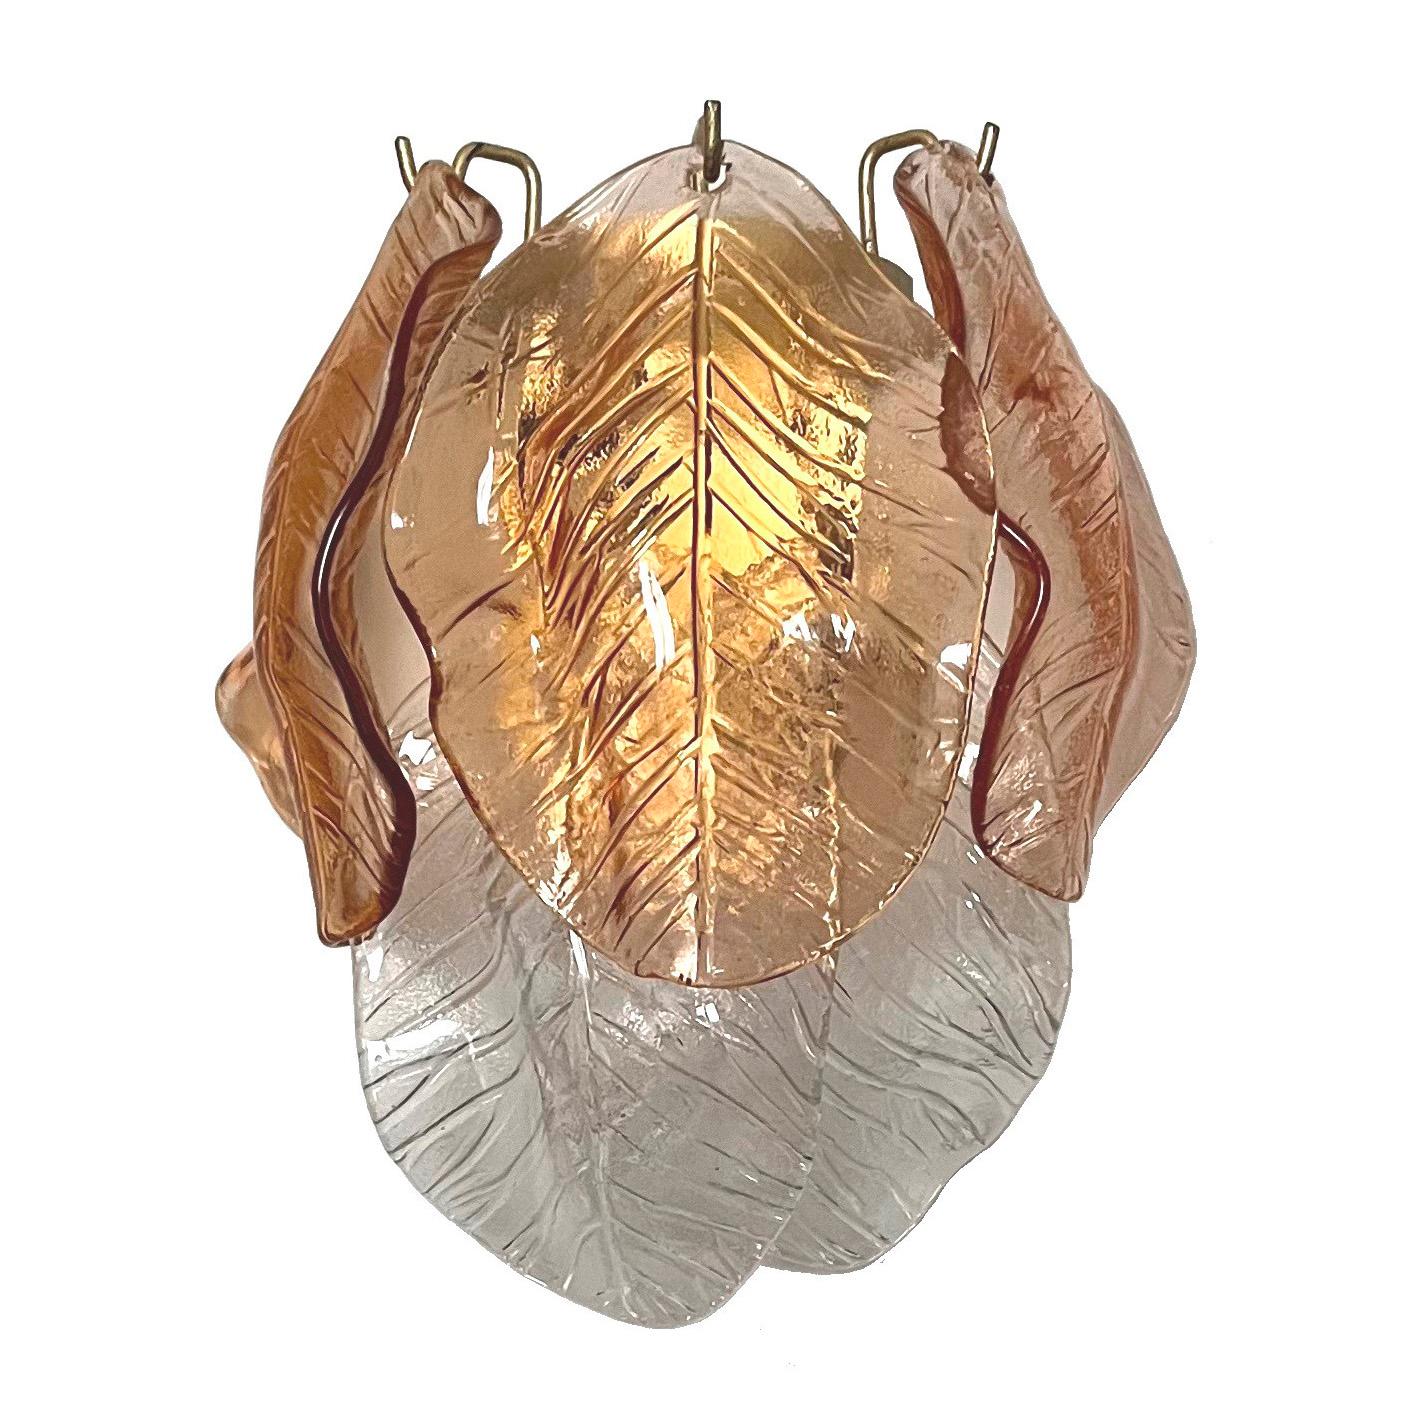 Stunning and beautiful pair of Italian amber clear murano leaf glass Wall Sconces from 1970s. These fixtures were made during the 1970s in Italy.
Each fixture is composed by 5 murano leaf glasses (3 amber and 2 clear)
Each sconce is equipped with